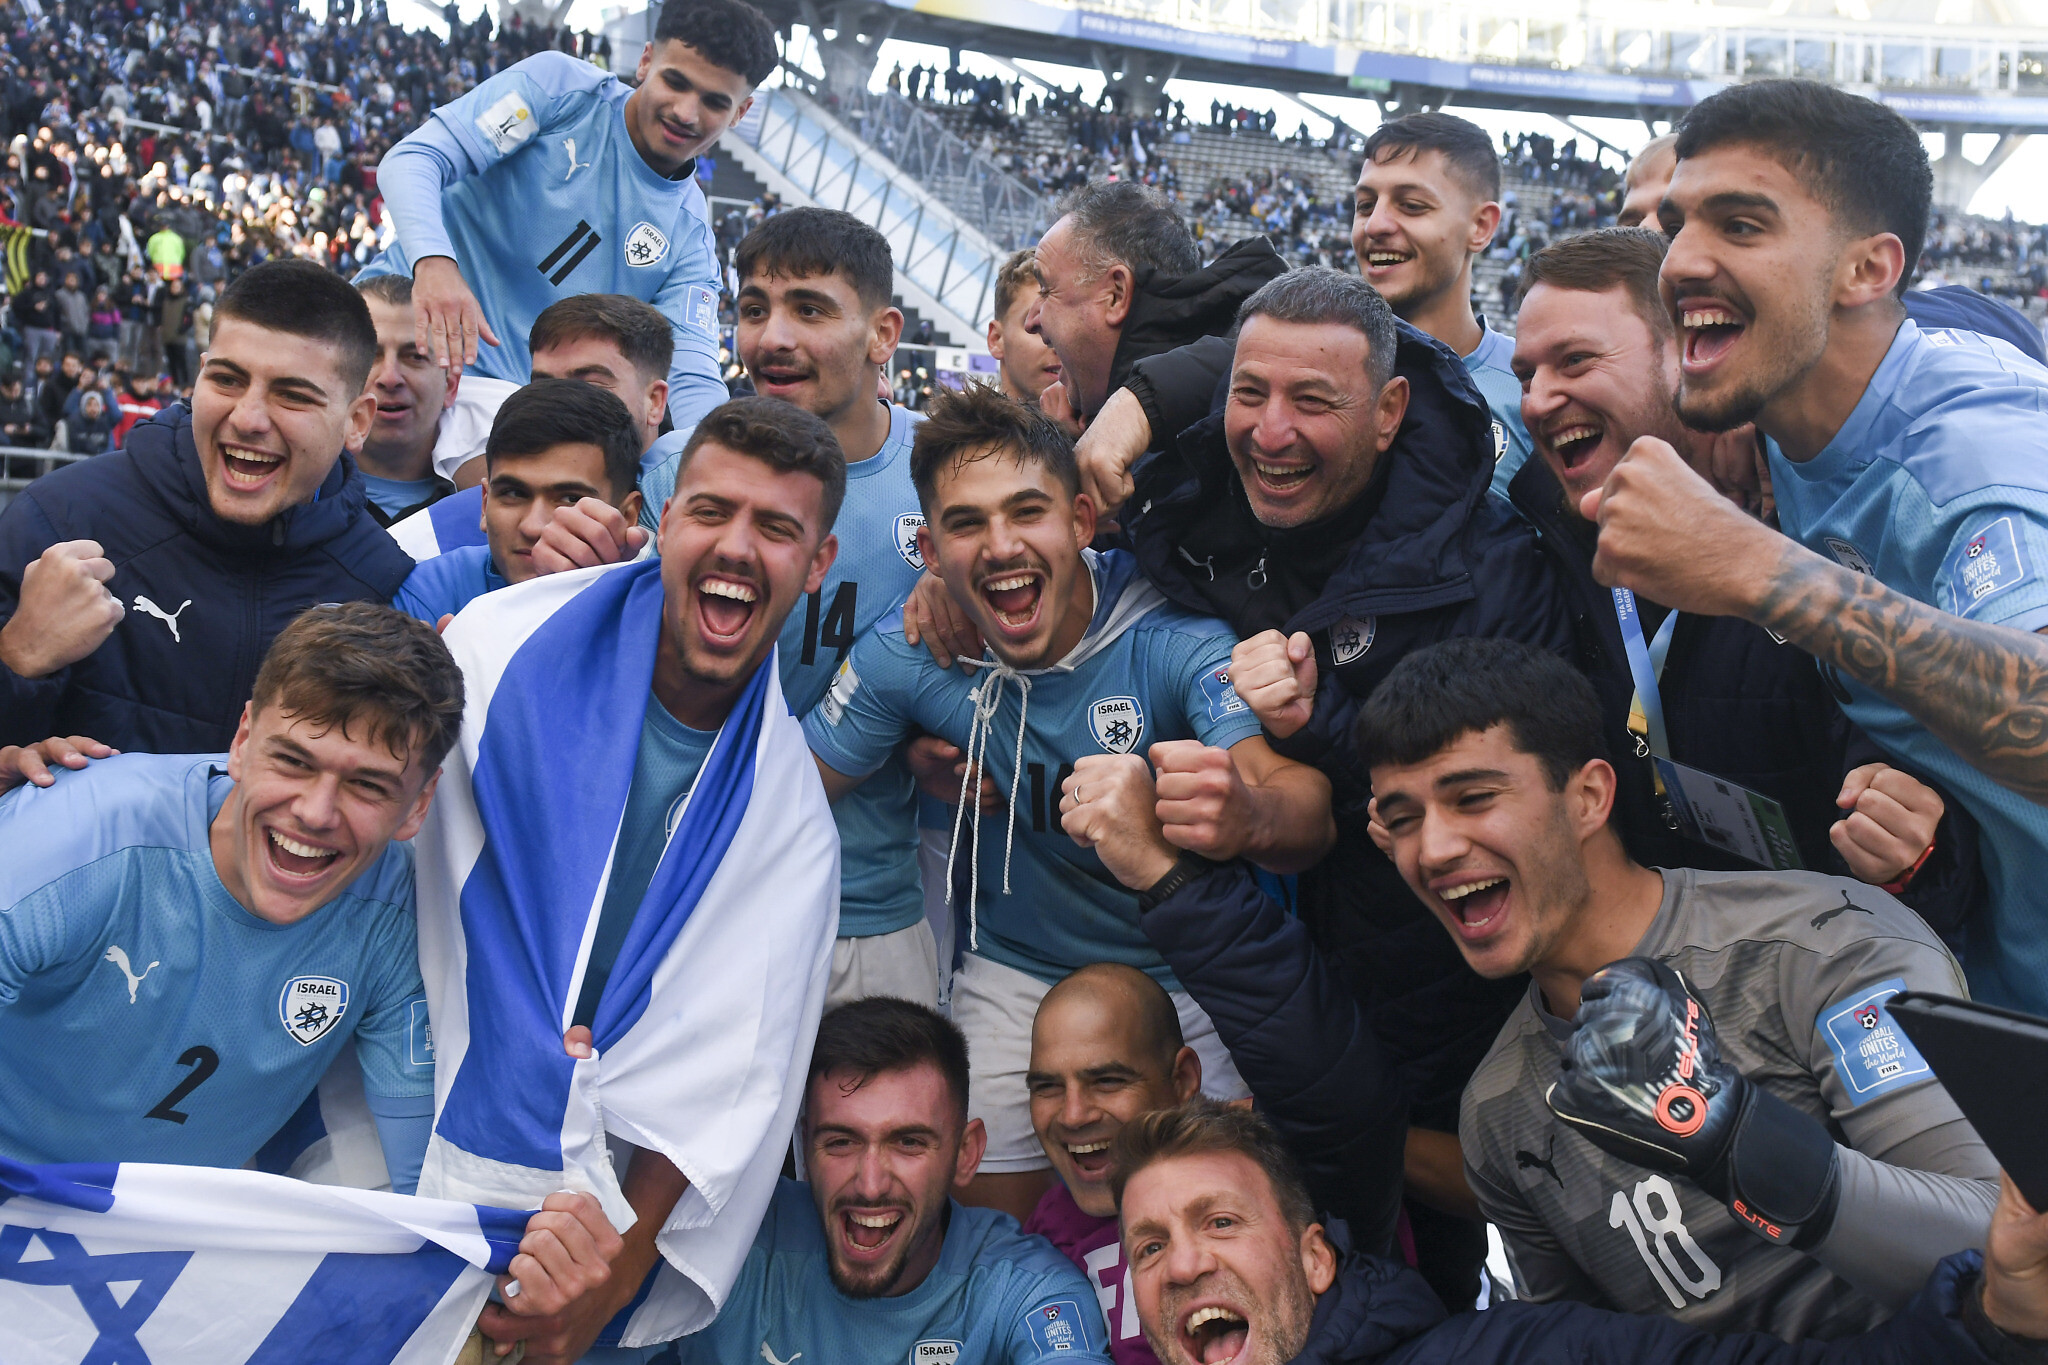 Israel clinches 3rd place in soccers U-20 World Cup, capping thrilling run The Times of Israel